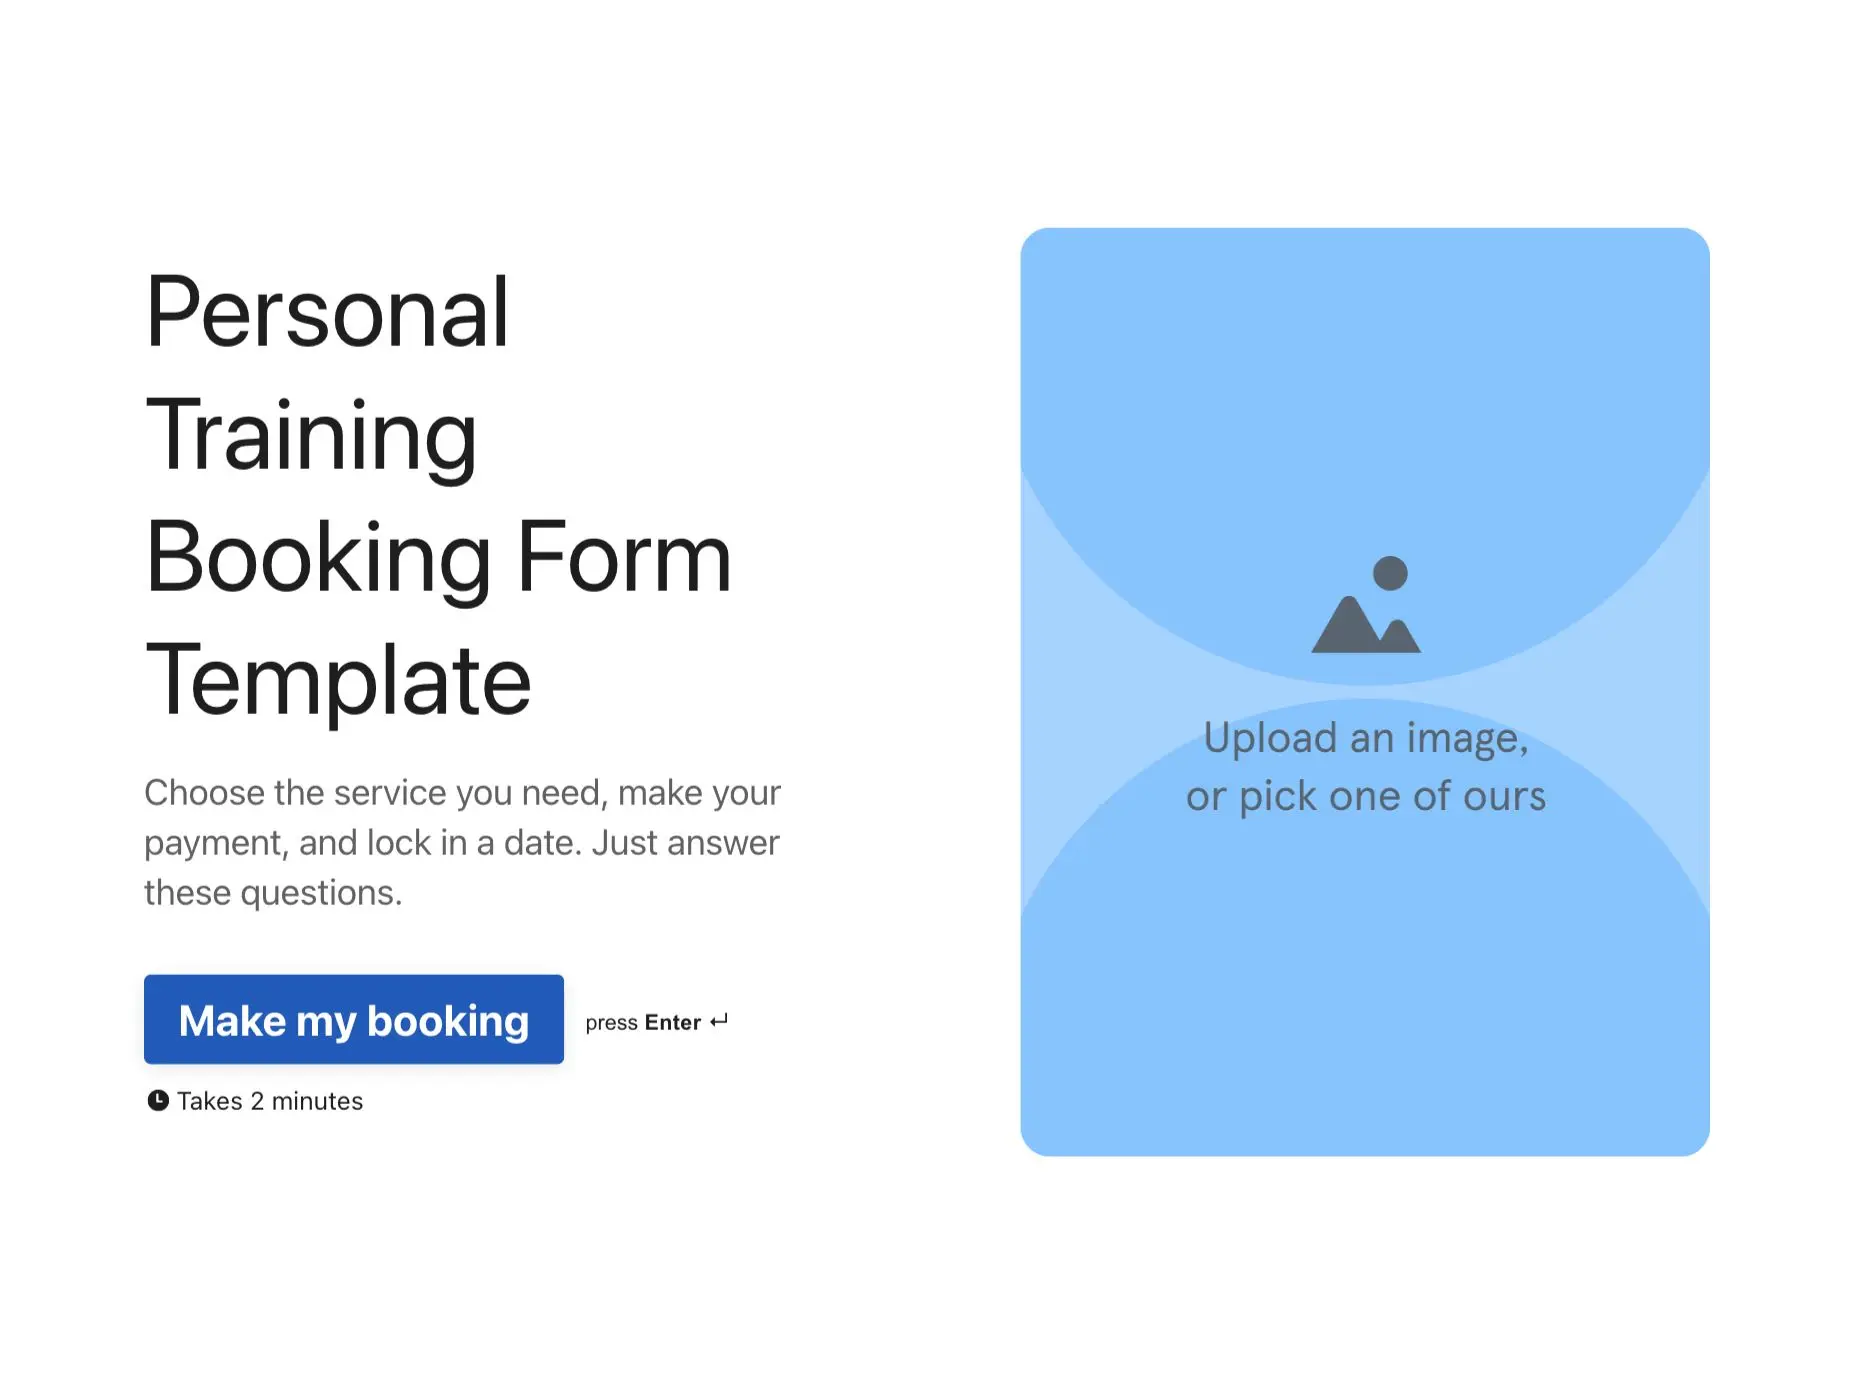 Personal Training Booking Form Template Hero